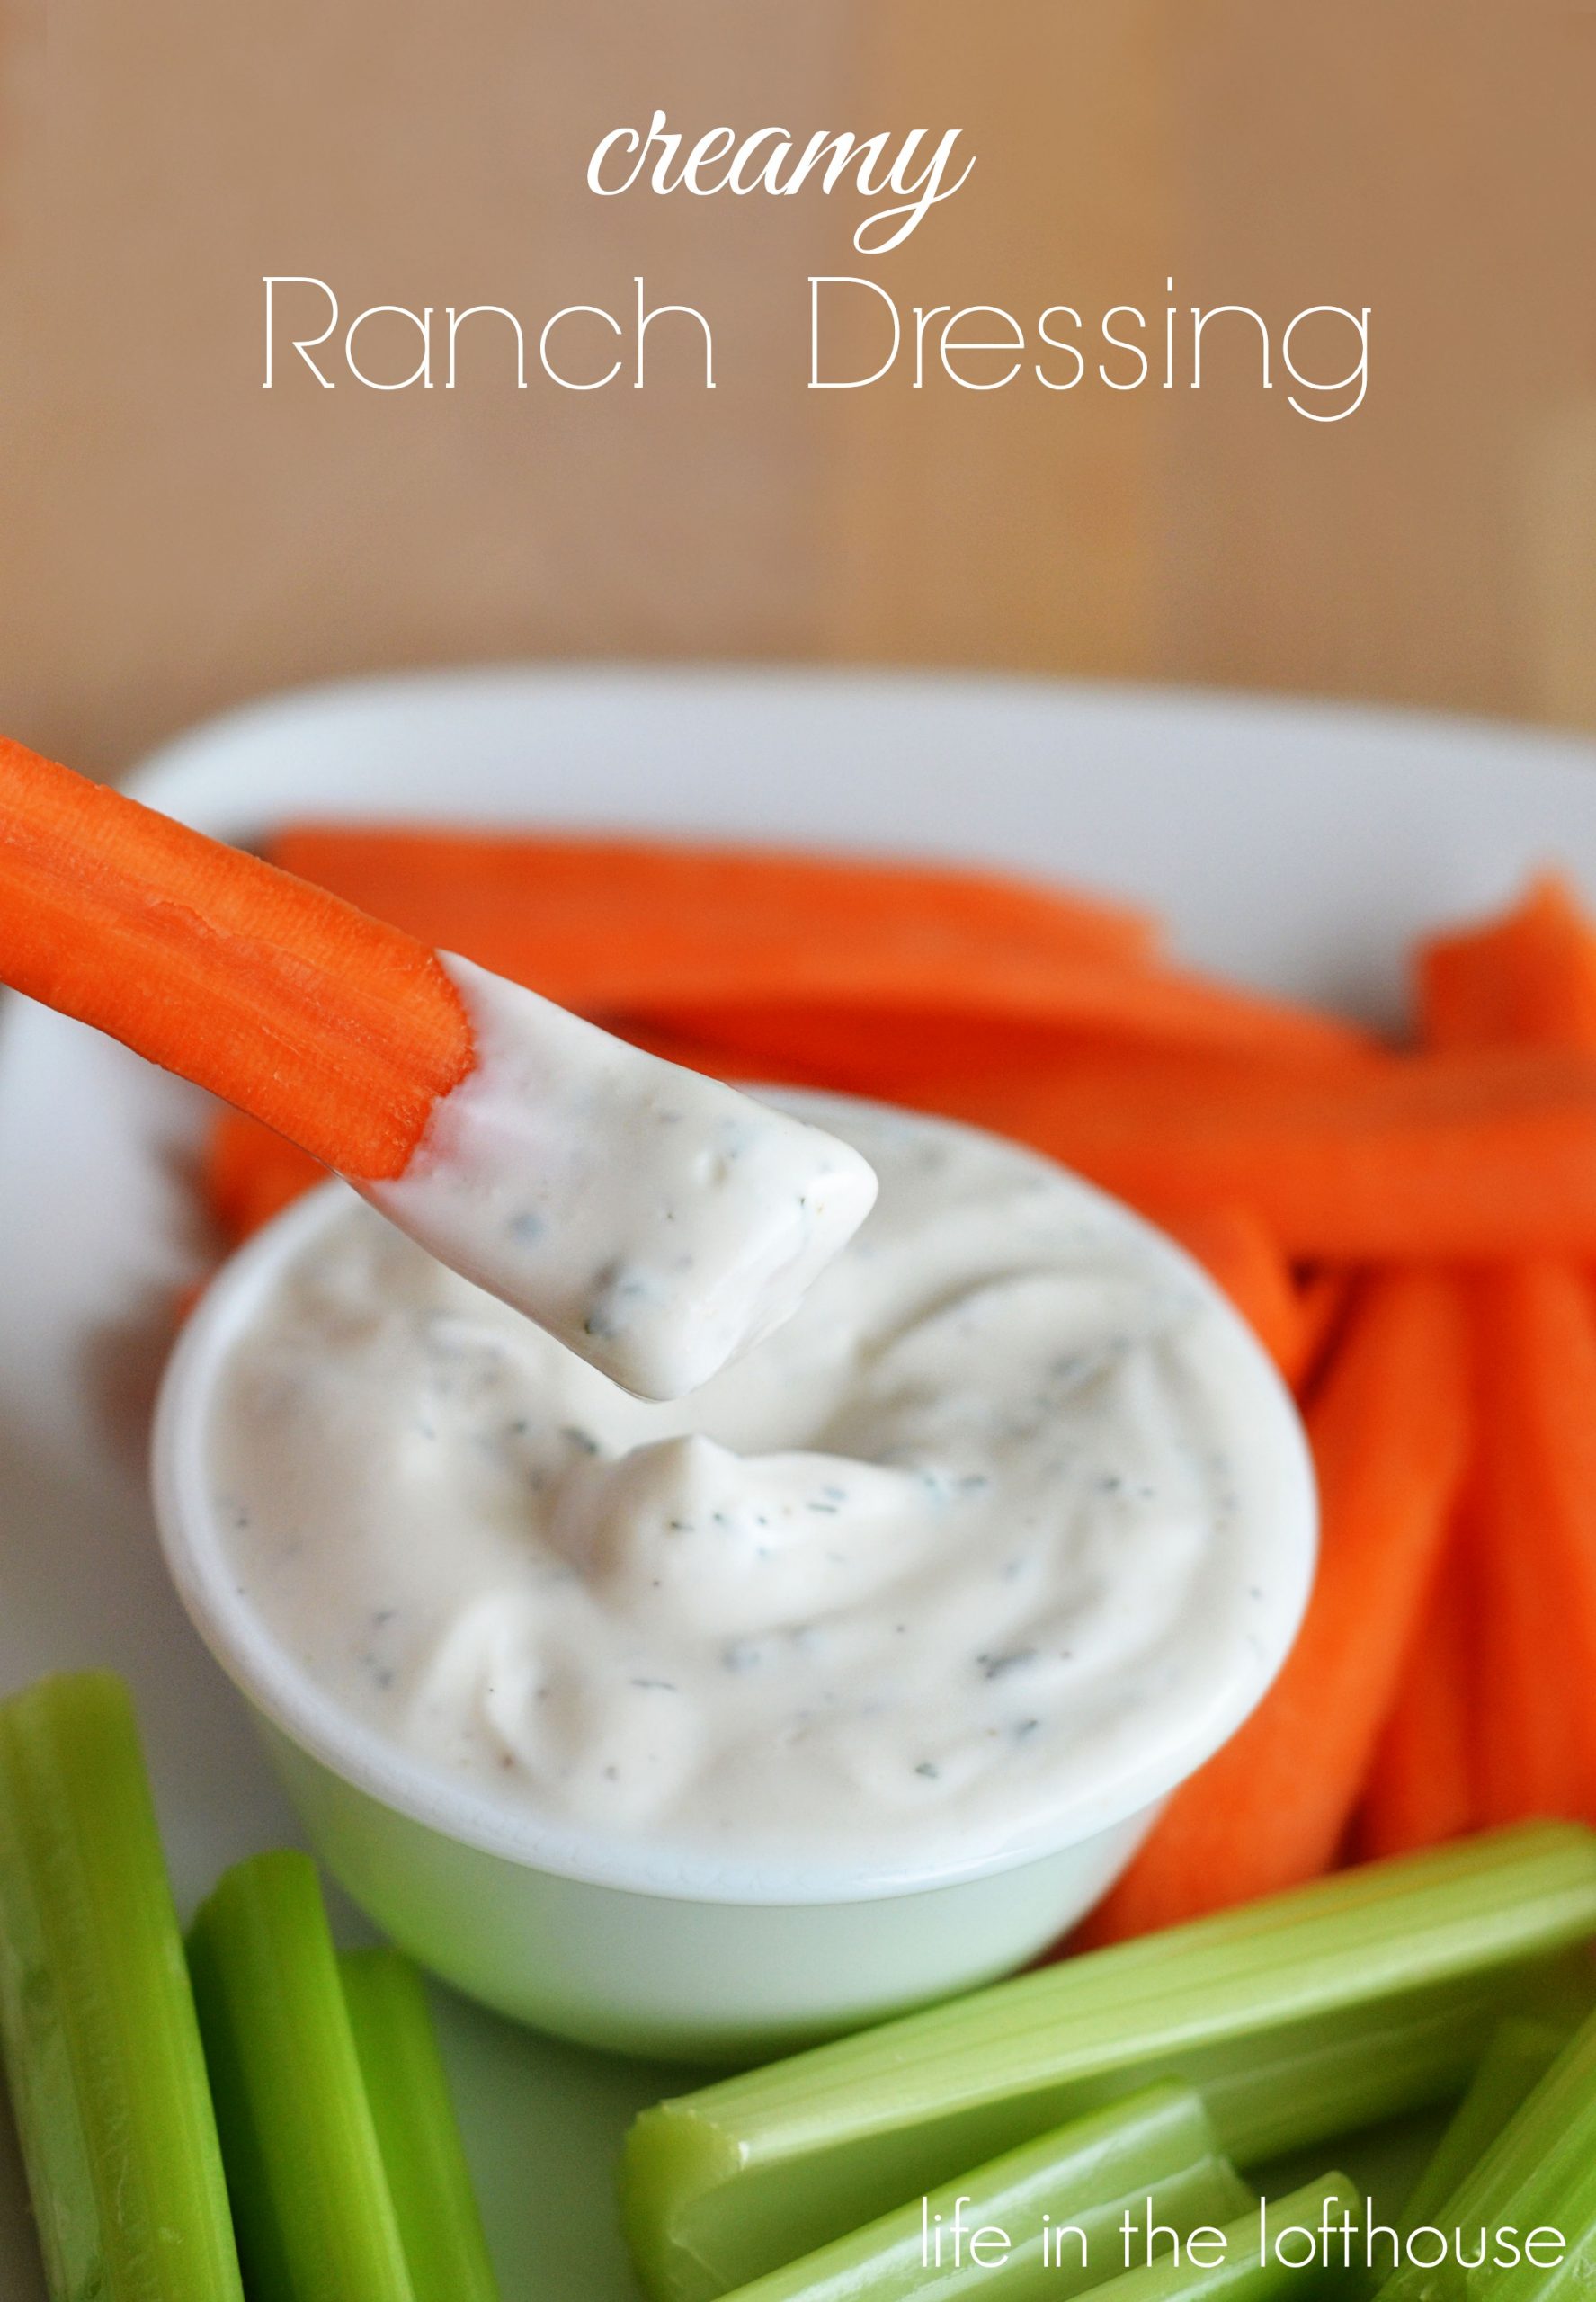 Delicious and creamy homemade ranch dressing that is packed full of flavor. Life-in-the-Lofthouse.com